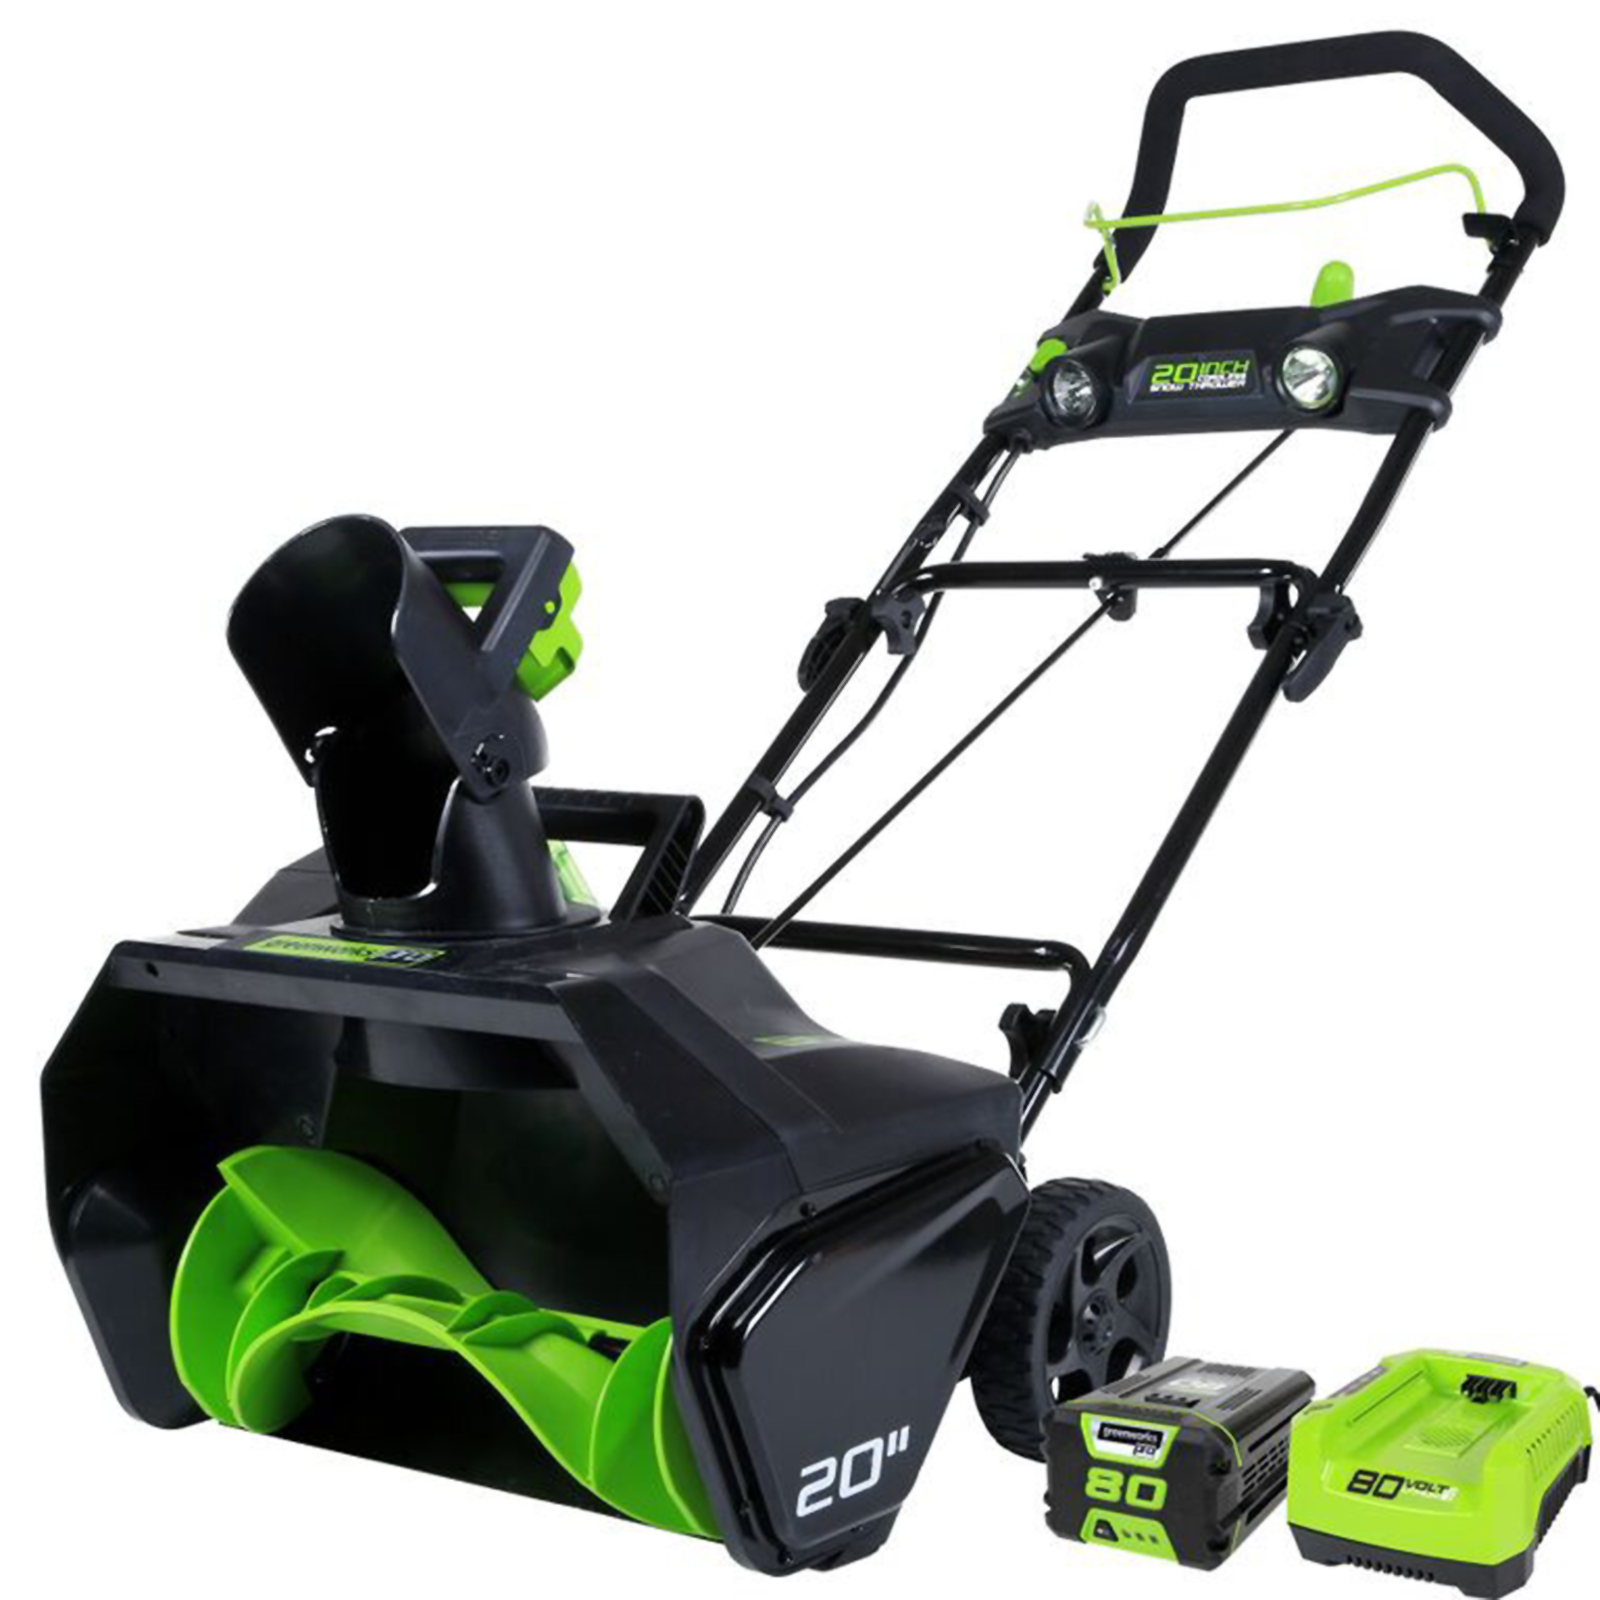 Greenworks Pro Cordless Snow Thrower Sears Marketplace